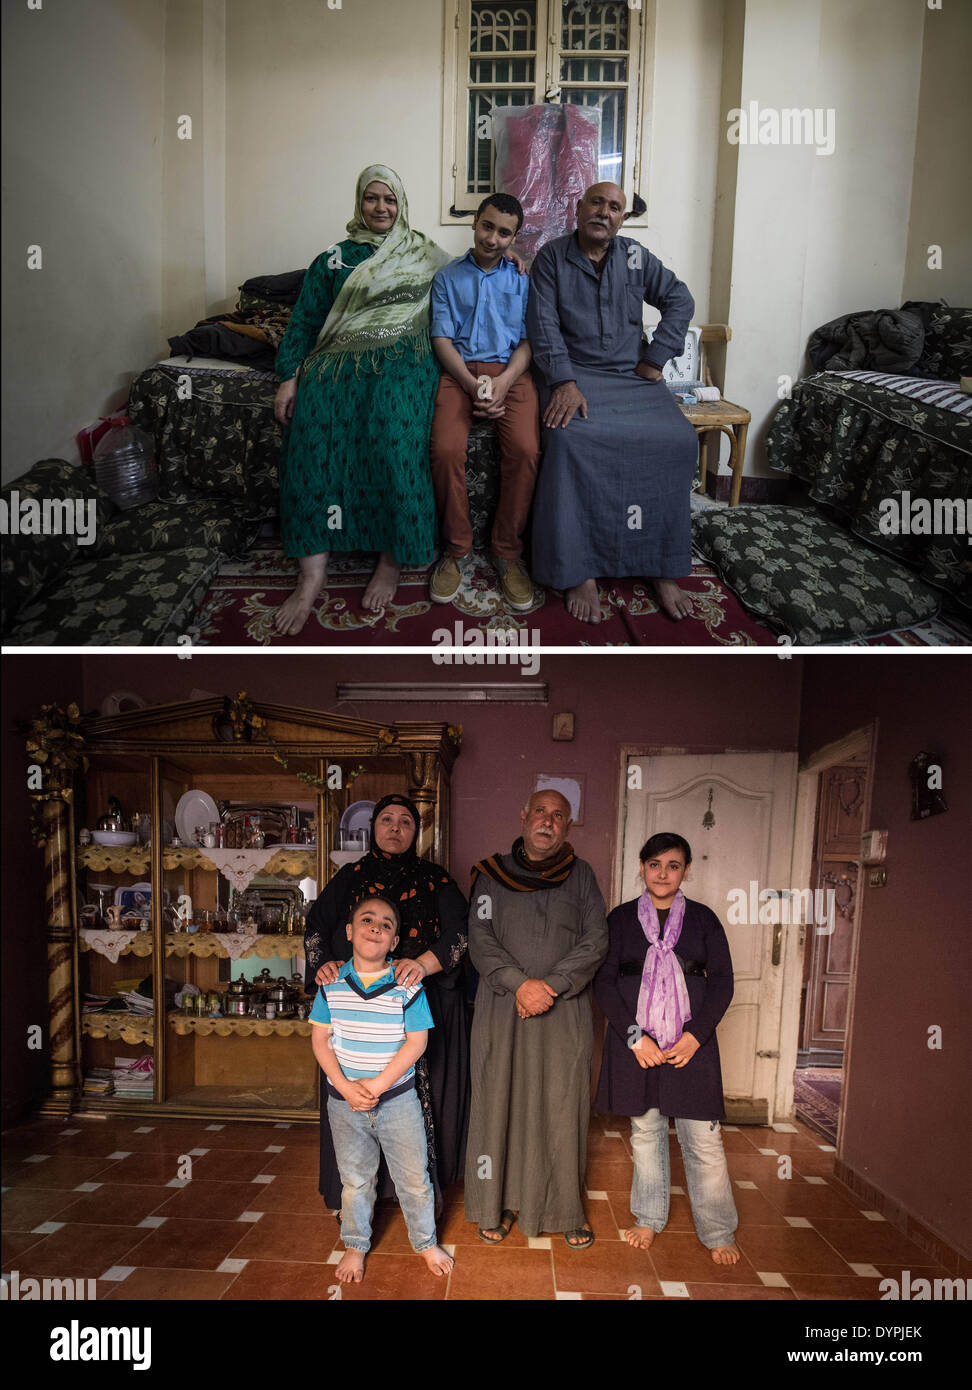 (140424) -- CAIRO, April 24, 2014 (Xinhua) -- Combined photo taken on March 31, 2014 (top) and April 8, 2014 (bottom) shows Abdel Majid Yamama and his two wives and children at his two homes in Giza, Cairo, Egypt. The Yamama family from Giza has lived on the Nile River for nearly one century. Presently Abdel Majid and his brother Abed Rabbo run the sailboat business for tourists at a dock in Maadi district of Cairo. The Yamama brothers and the boatmen they hire have seen a dramatic drop on business as a result of the depression in tourism since 2011, when the Revolution began throughout the co Stock Photo